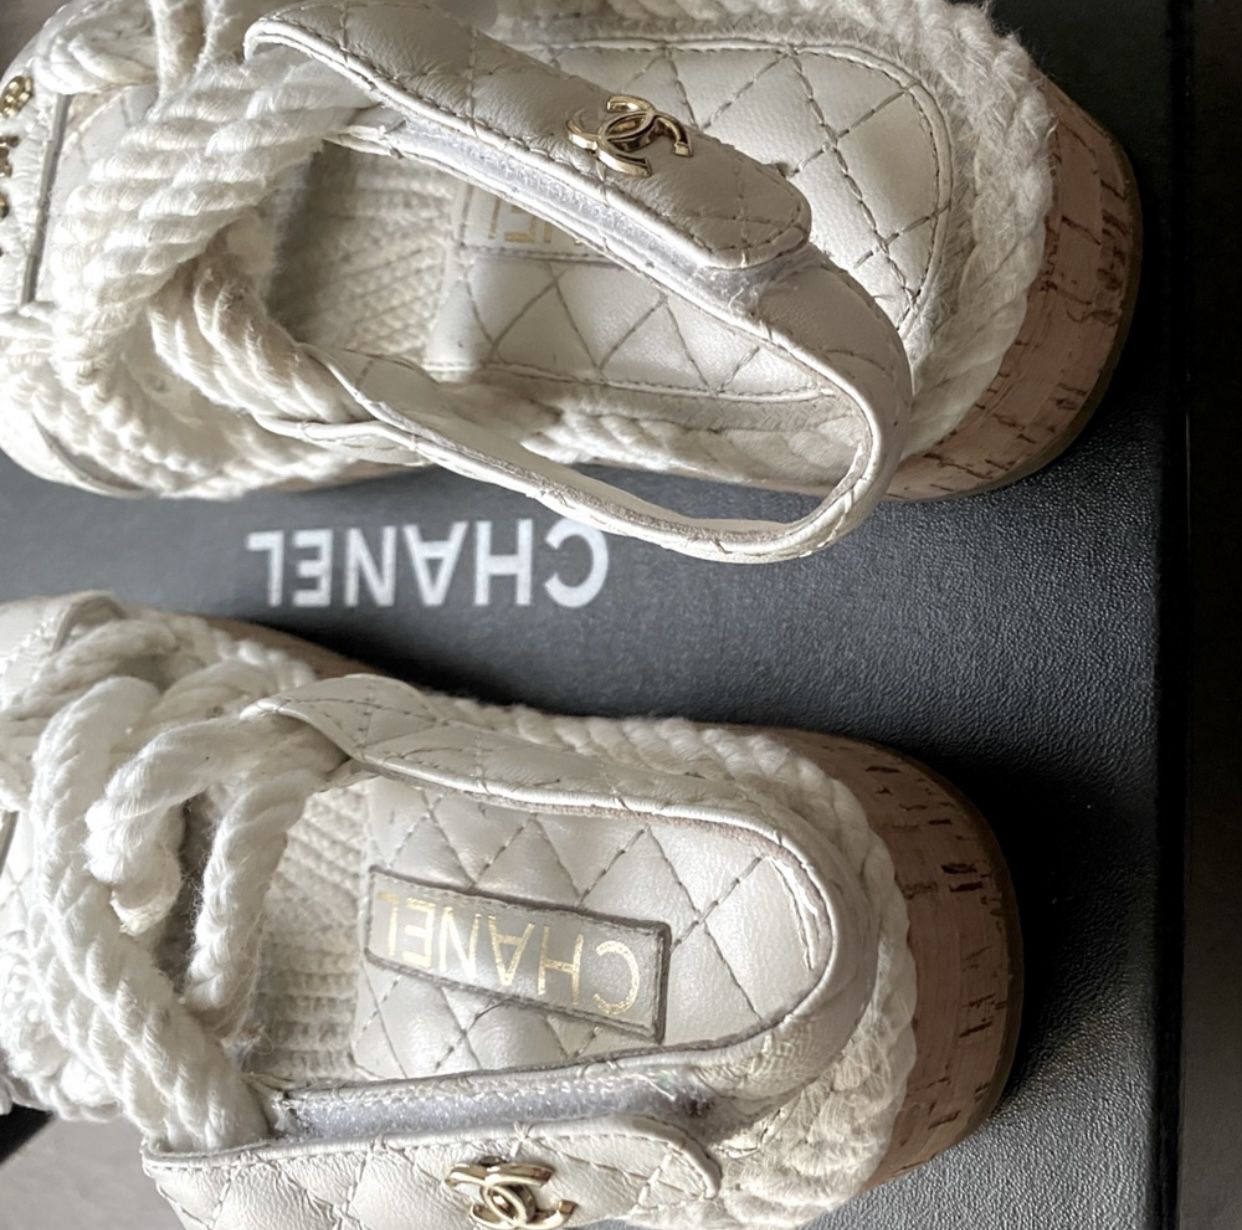 White Chanel Rope Sandals for Sale in Los Angeles, CA - OfferUp